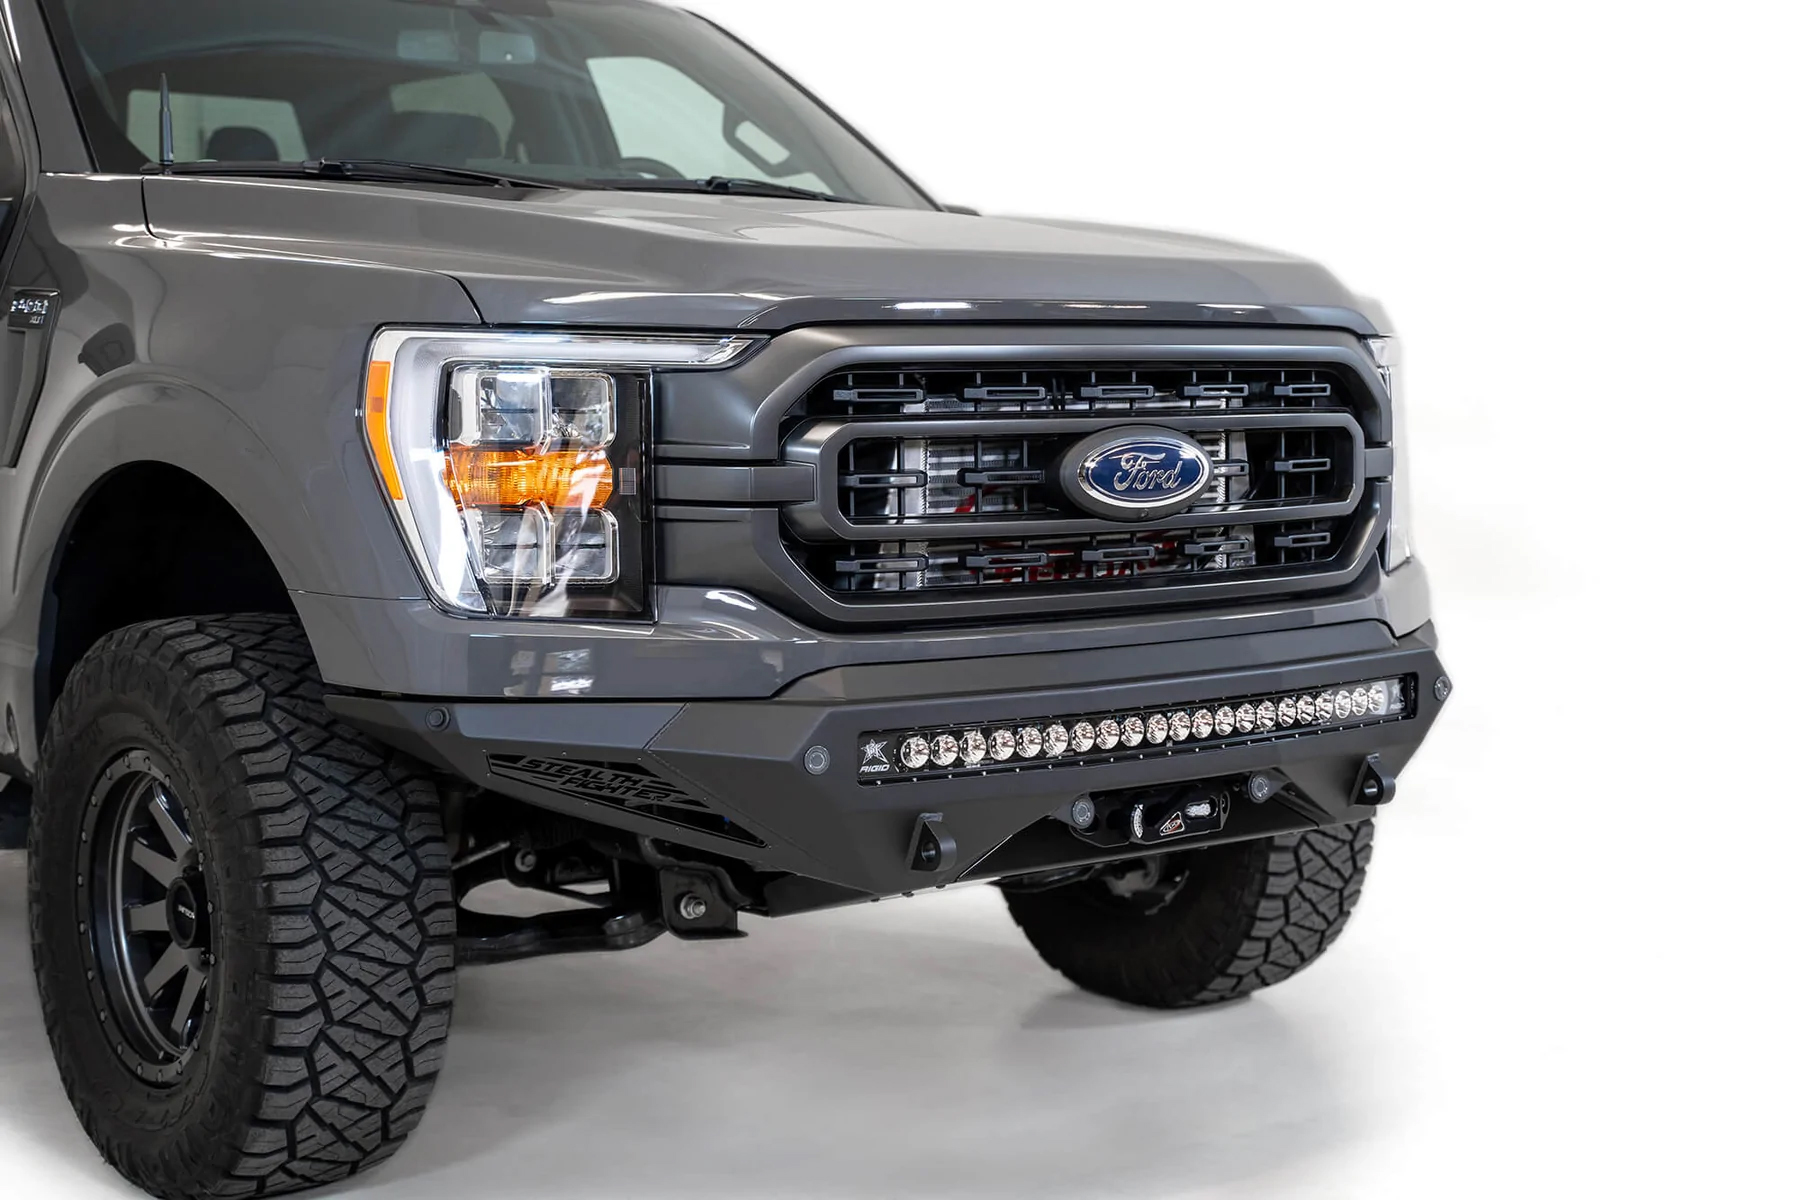 NEW STEDI Switch Fascia to suit Ford Ranger Raptor PX2 PX3 and Everest